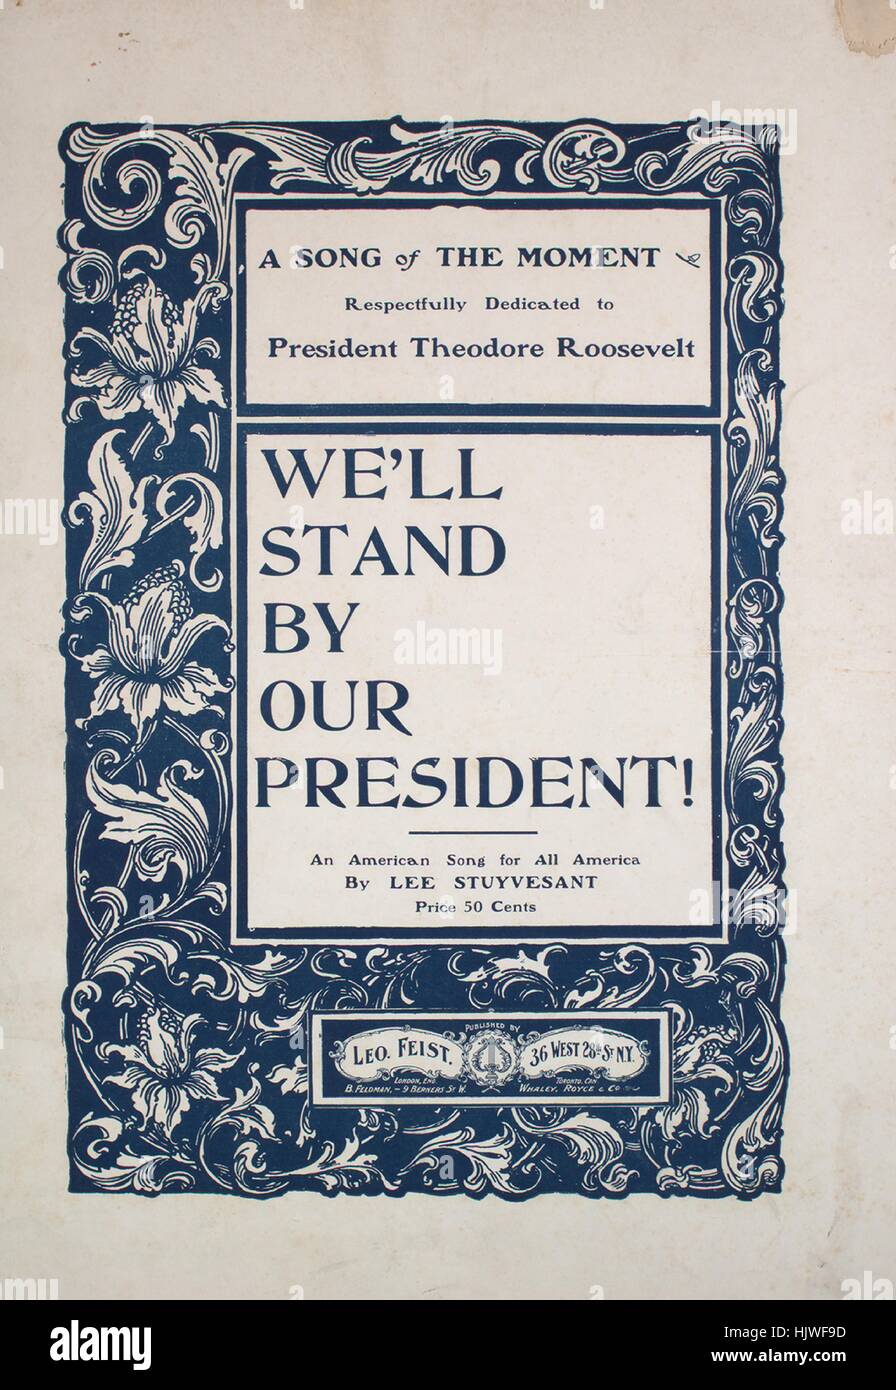 Sheet music cover image of the song 'We'll Stand By Our President An American Song for All America ', with original authorship notes reading 'By Lee Stuyvesant', 1902. The publisher is listed as 'Leo. Feist', the form of composition is 'strophic with chorus', the instrumentation is 'piano and voice', the first line reads 'This battle cry, 'we'll do or die,' Was the cry our fathers used', and the illustration artist is listed as 'Teller, Sons and Dorner New York Advertisements  Ad on back cover for Feist and Frankenthaler stock'. Stock Photo